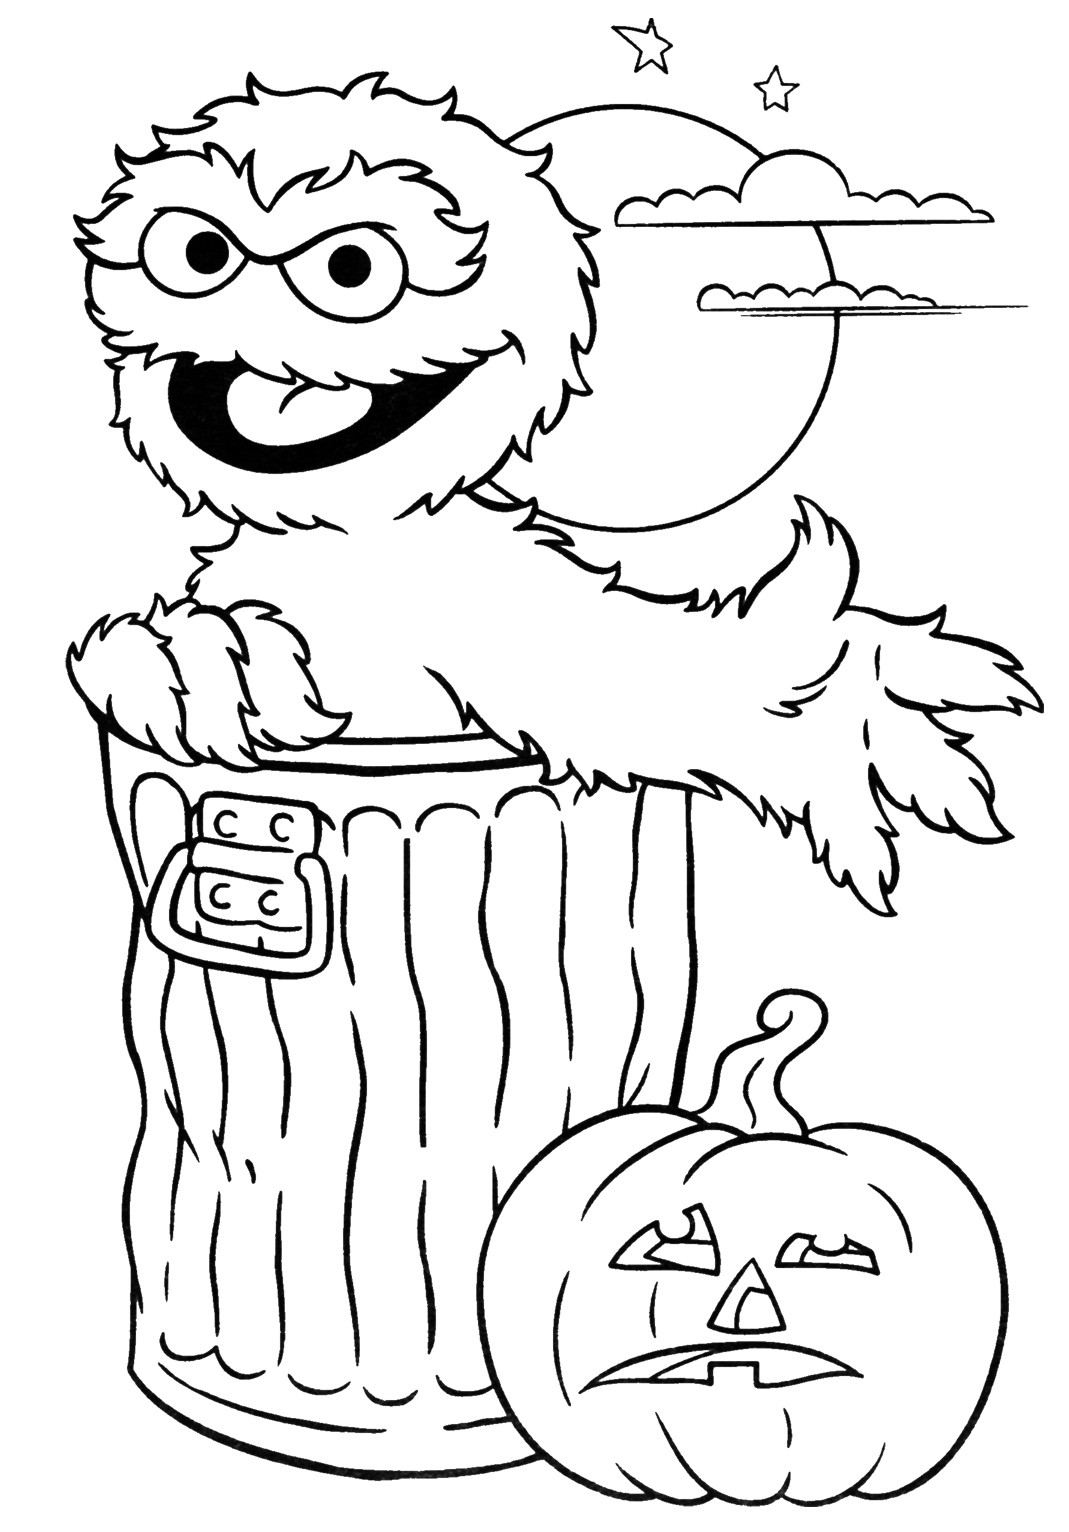 Halloween Kids Coloring Pages
 HALLOWEEN COLORINGS